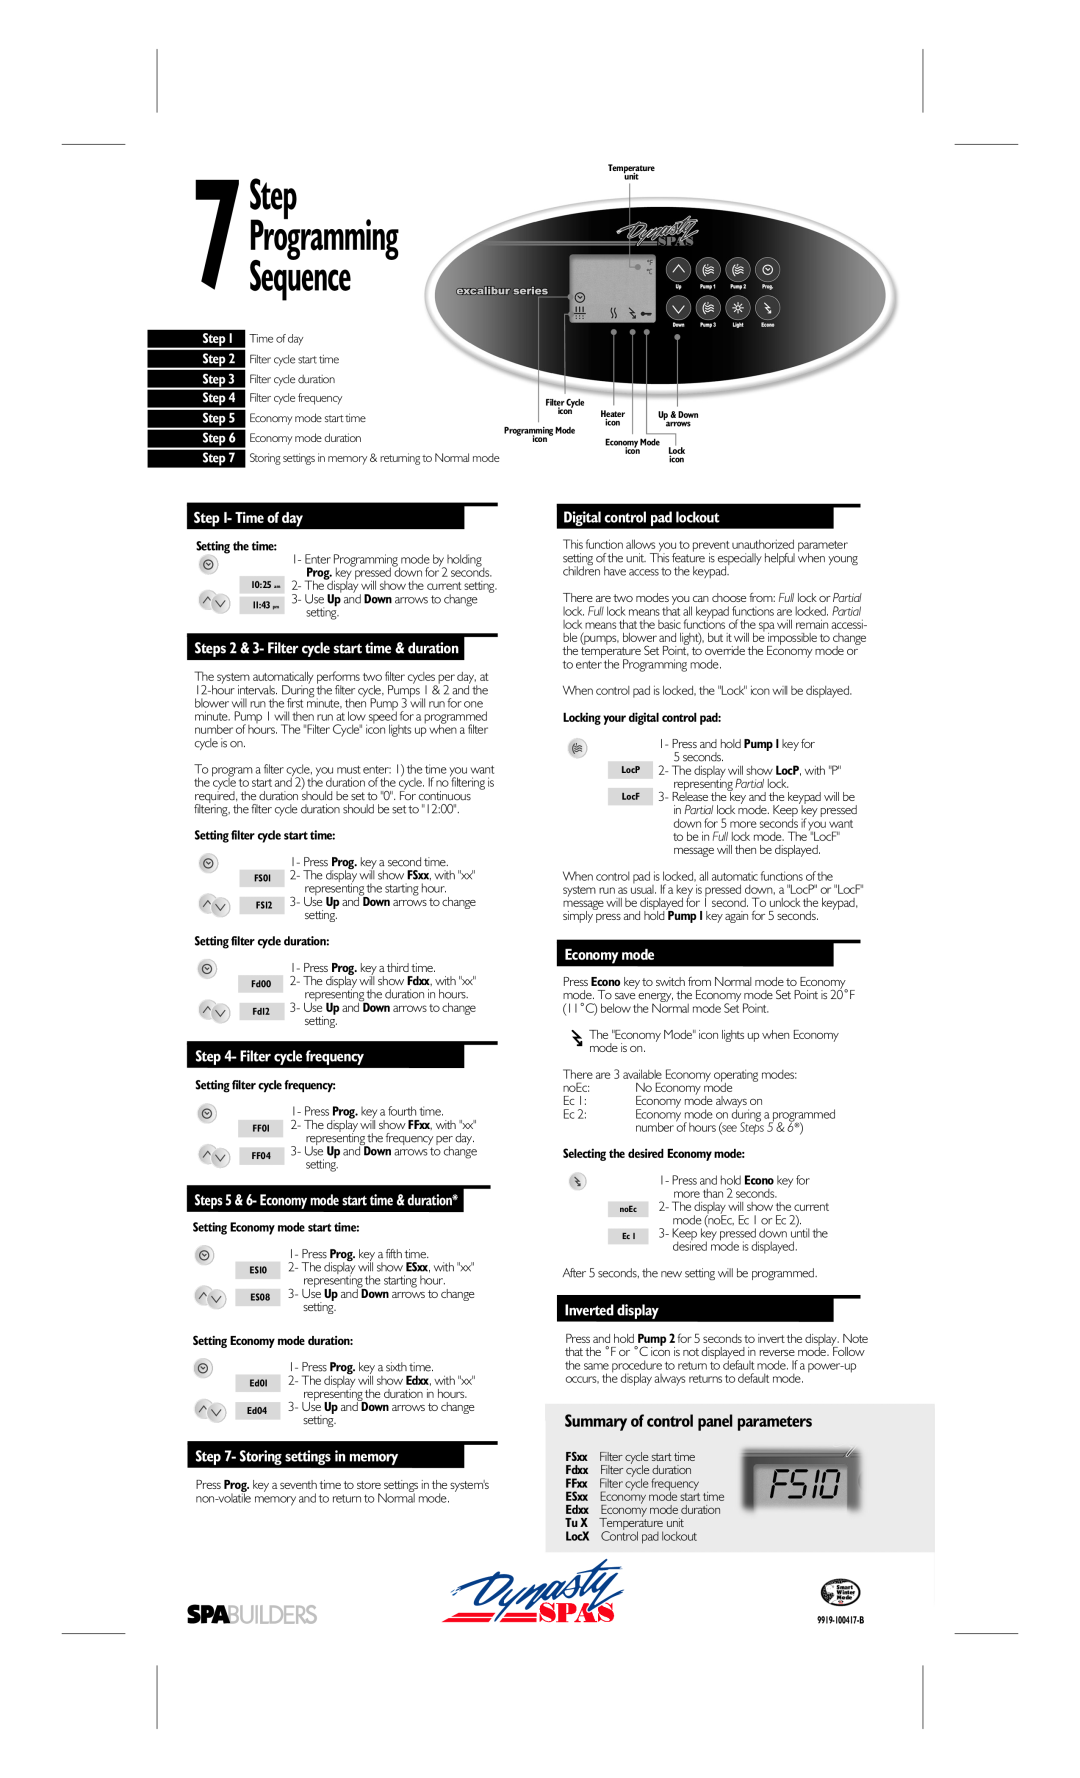 Dynasty Spas MC-MP-DY2 manual Summary of control panel parameters, 7Step Programming Sequence, Time of day, Economy mode 